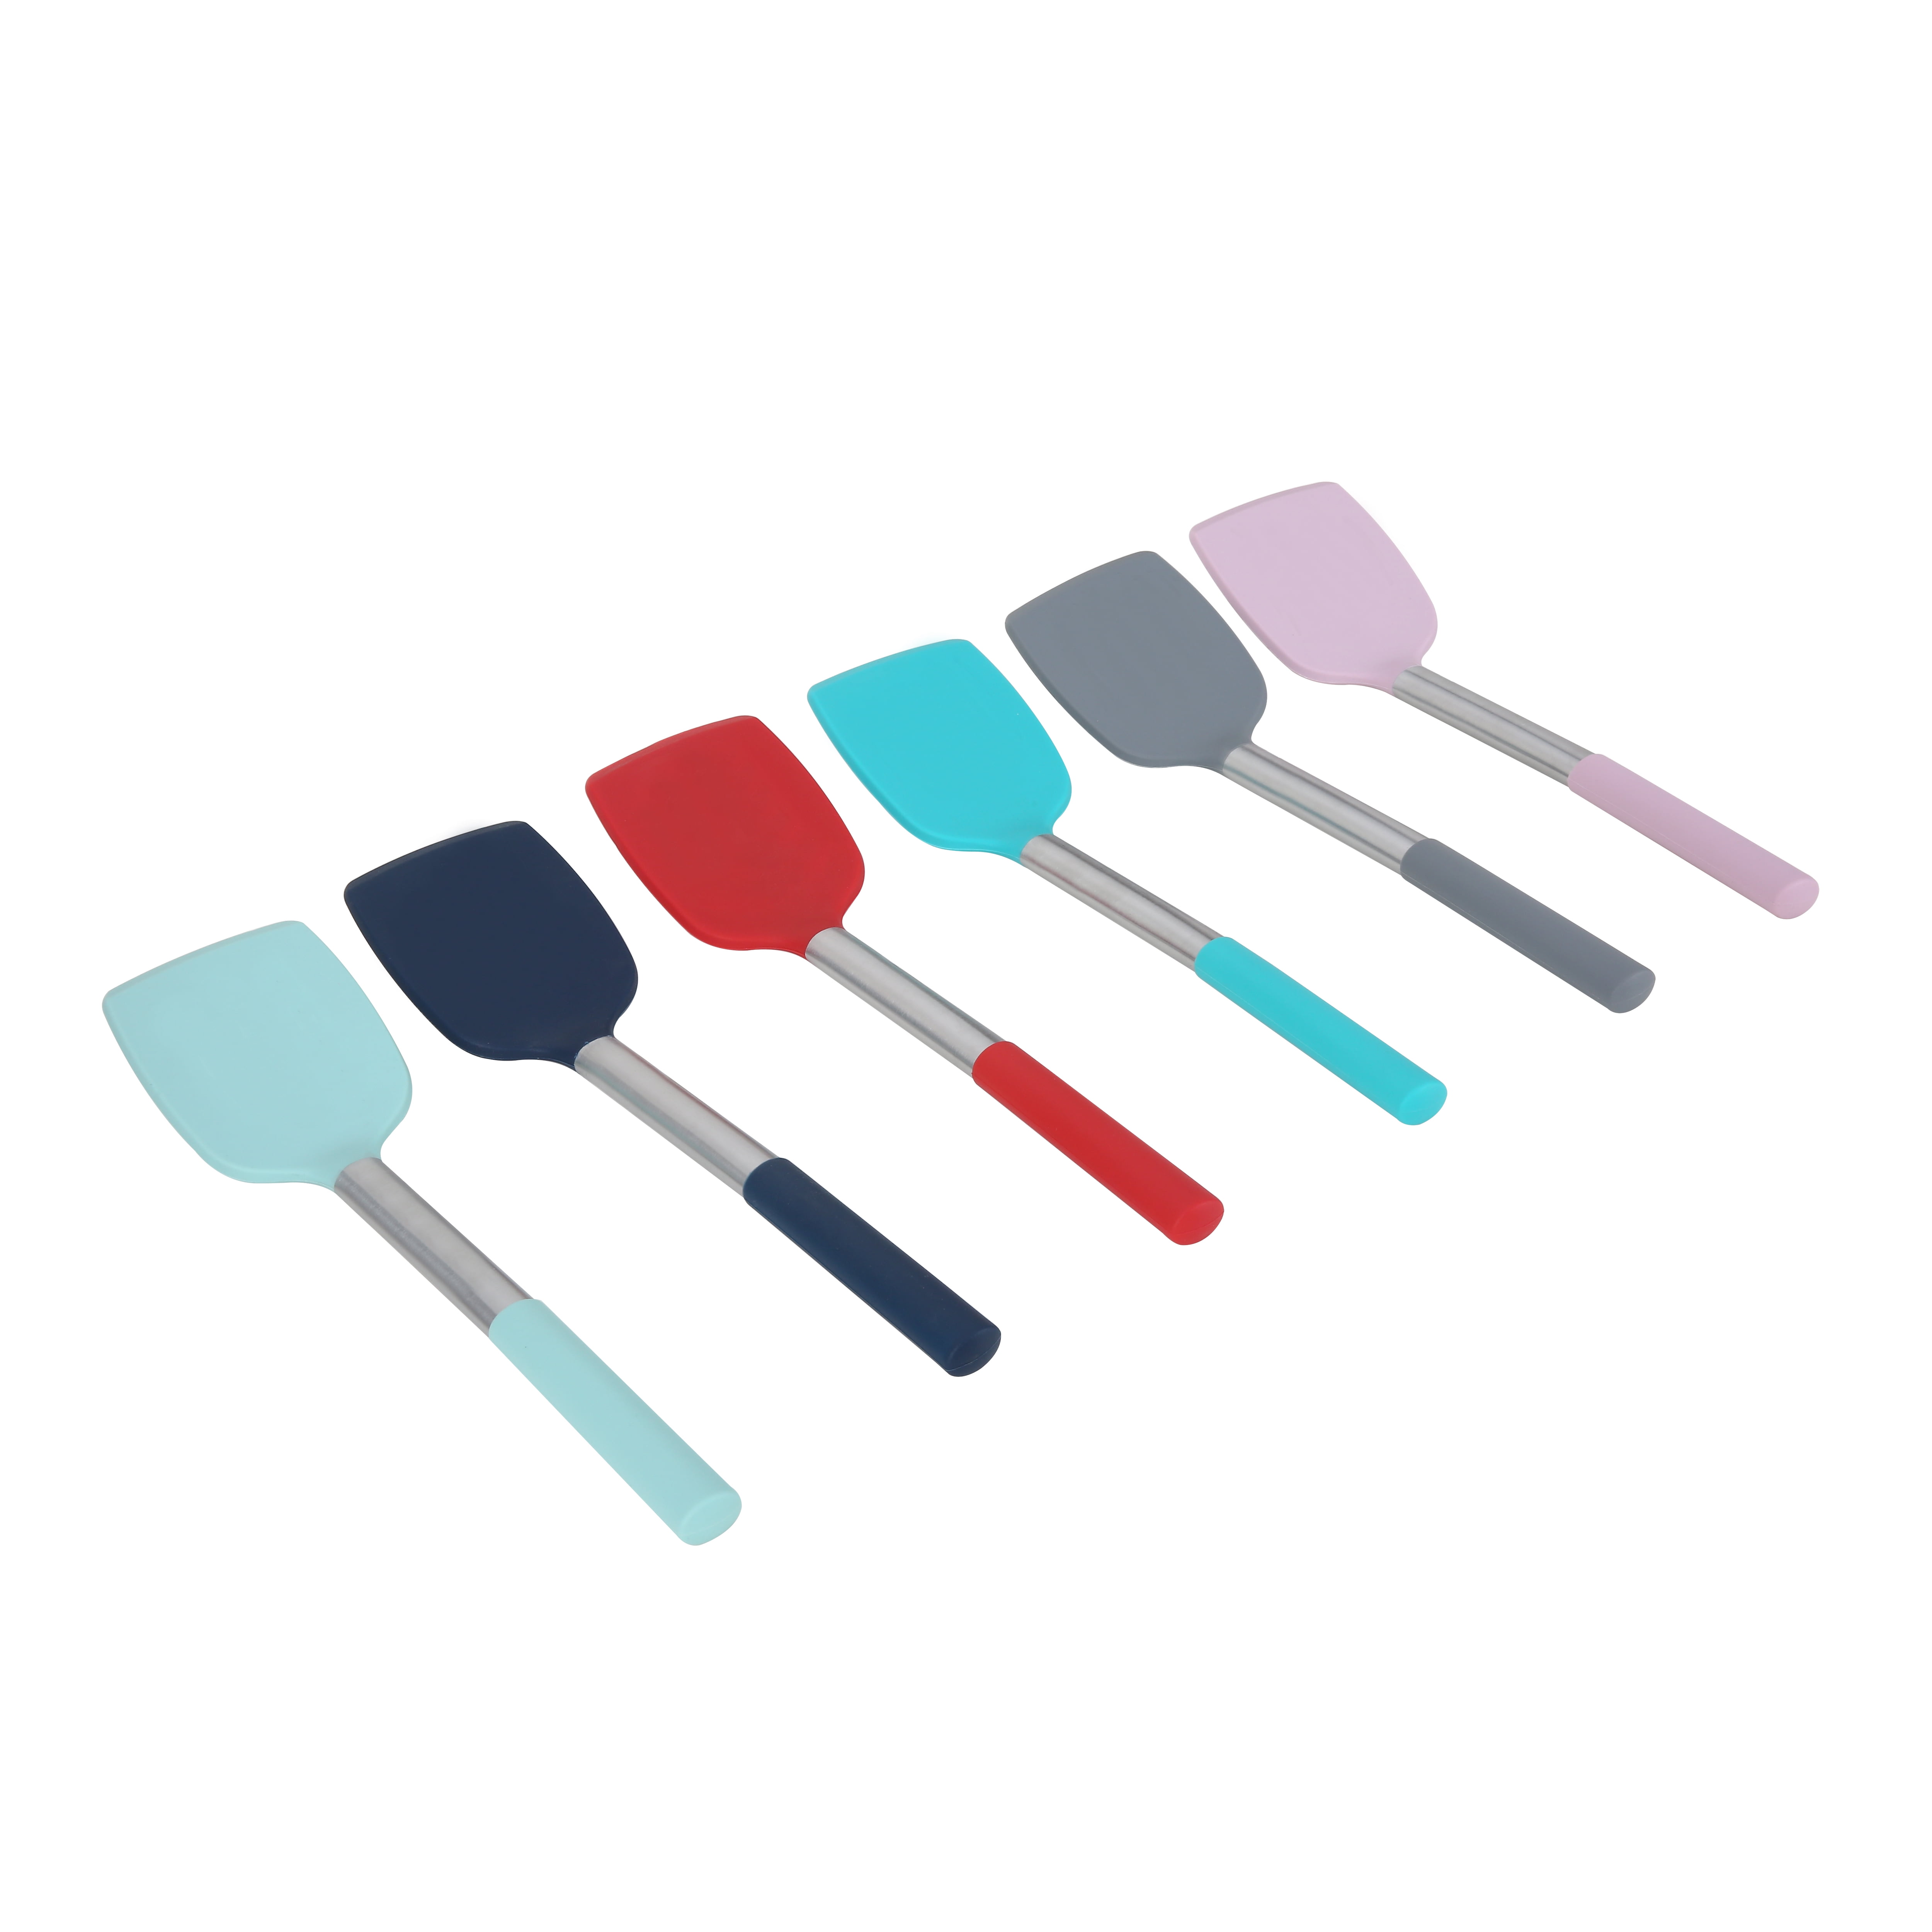 Mainstays Colorful Silicone Spatulas Set with Wooden Handles - Red, Silver, Green & Blue - 4 ct